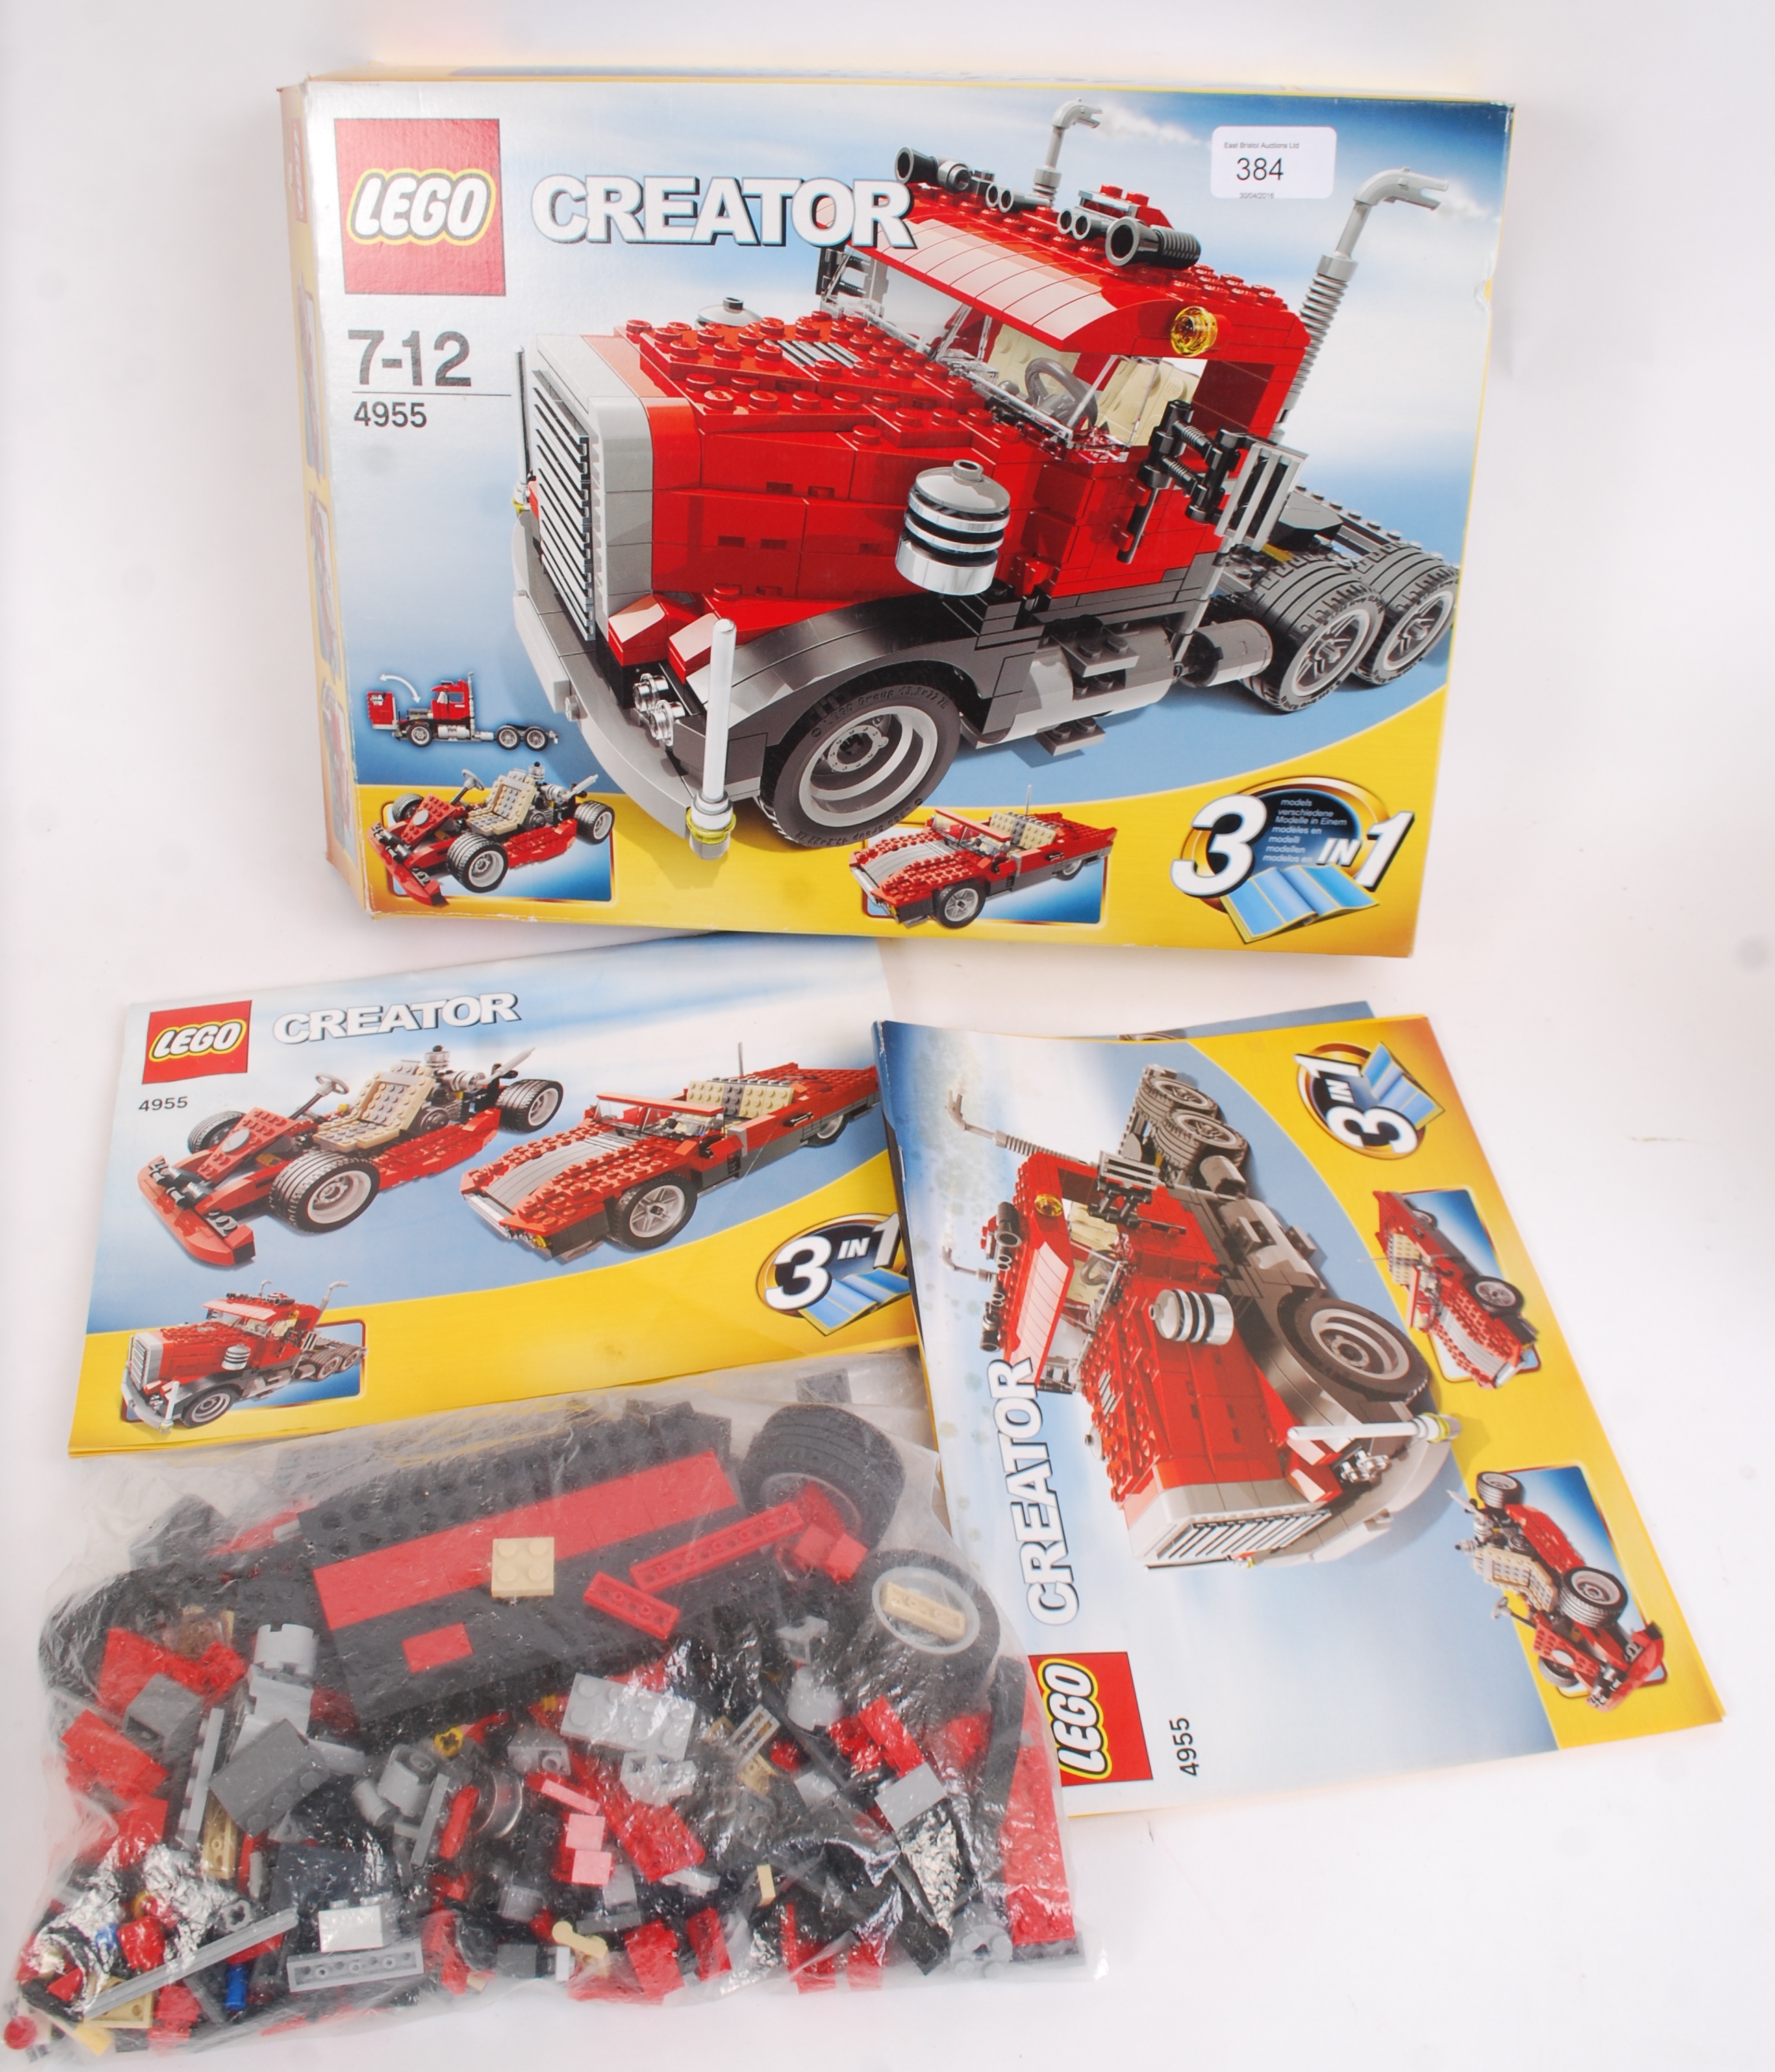 LEGO: A Lego Creator set 4955. With instructions, within the original box. - Image 2 of 3